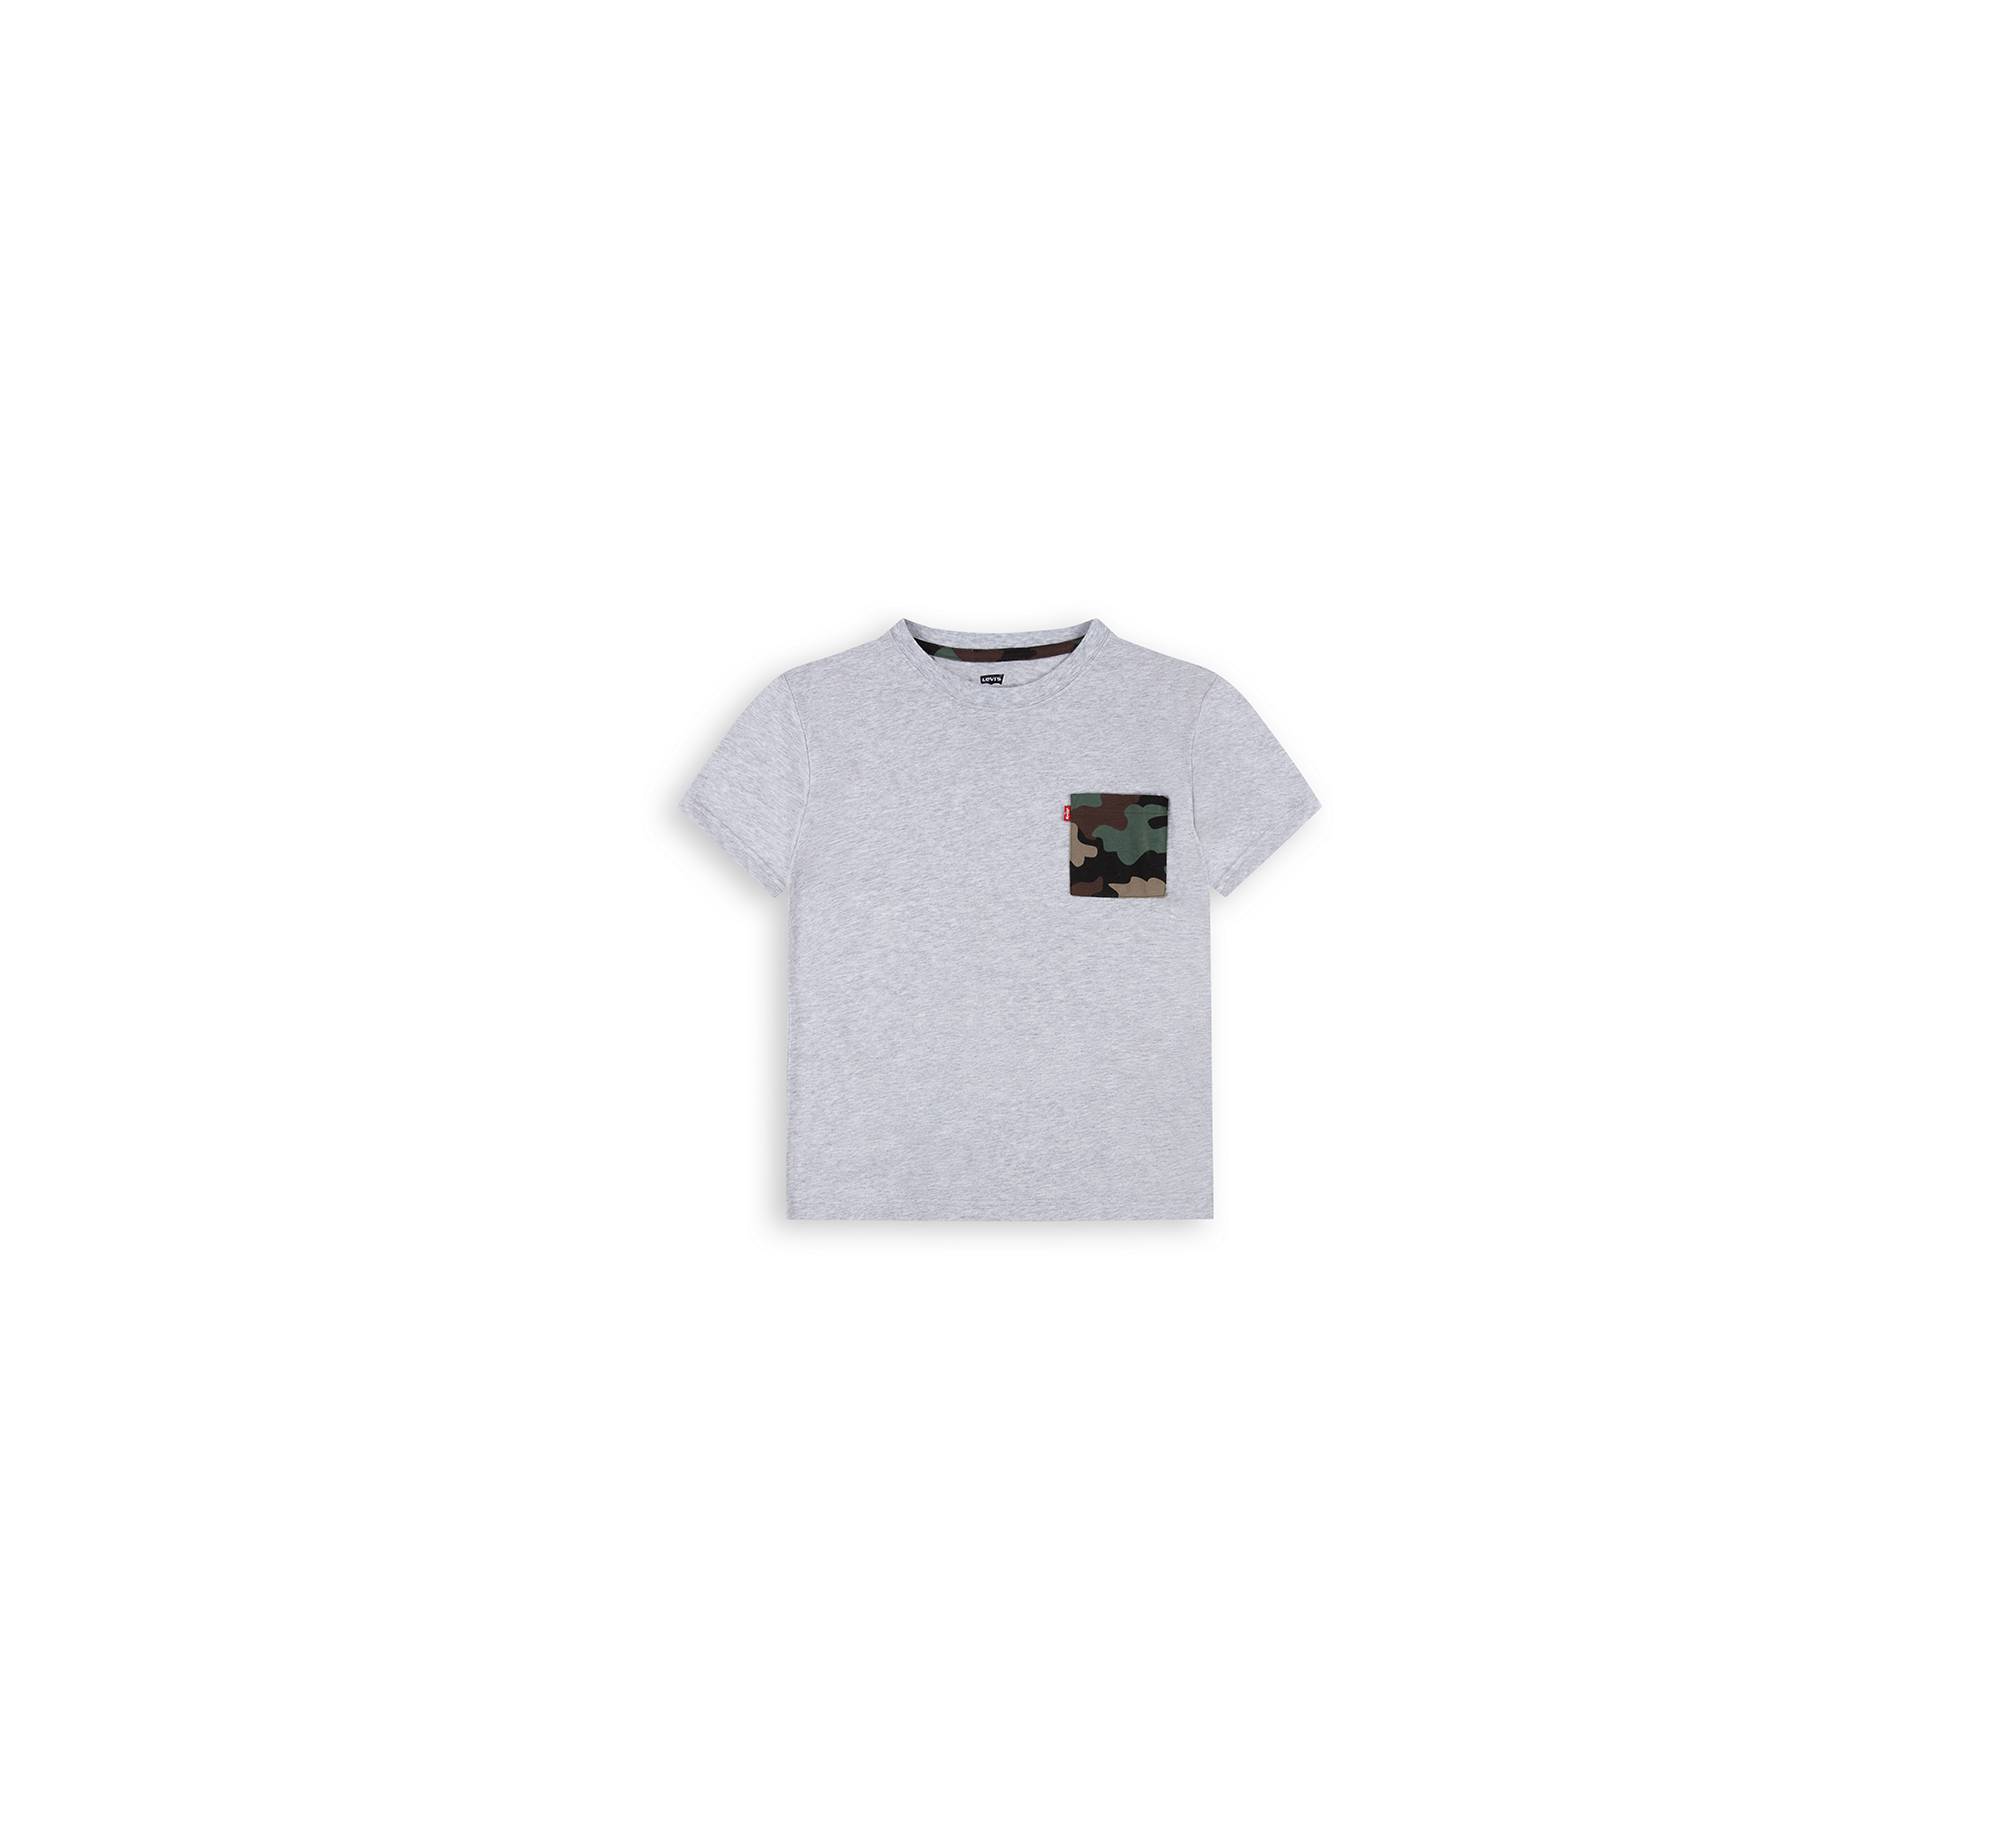 Teenager Relaxed Fit Camo Pocket Tee 1